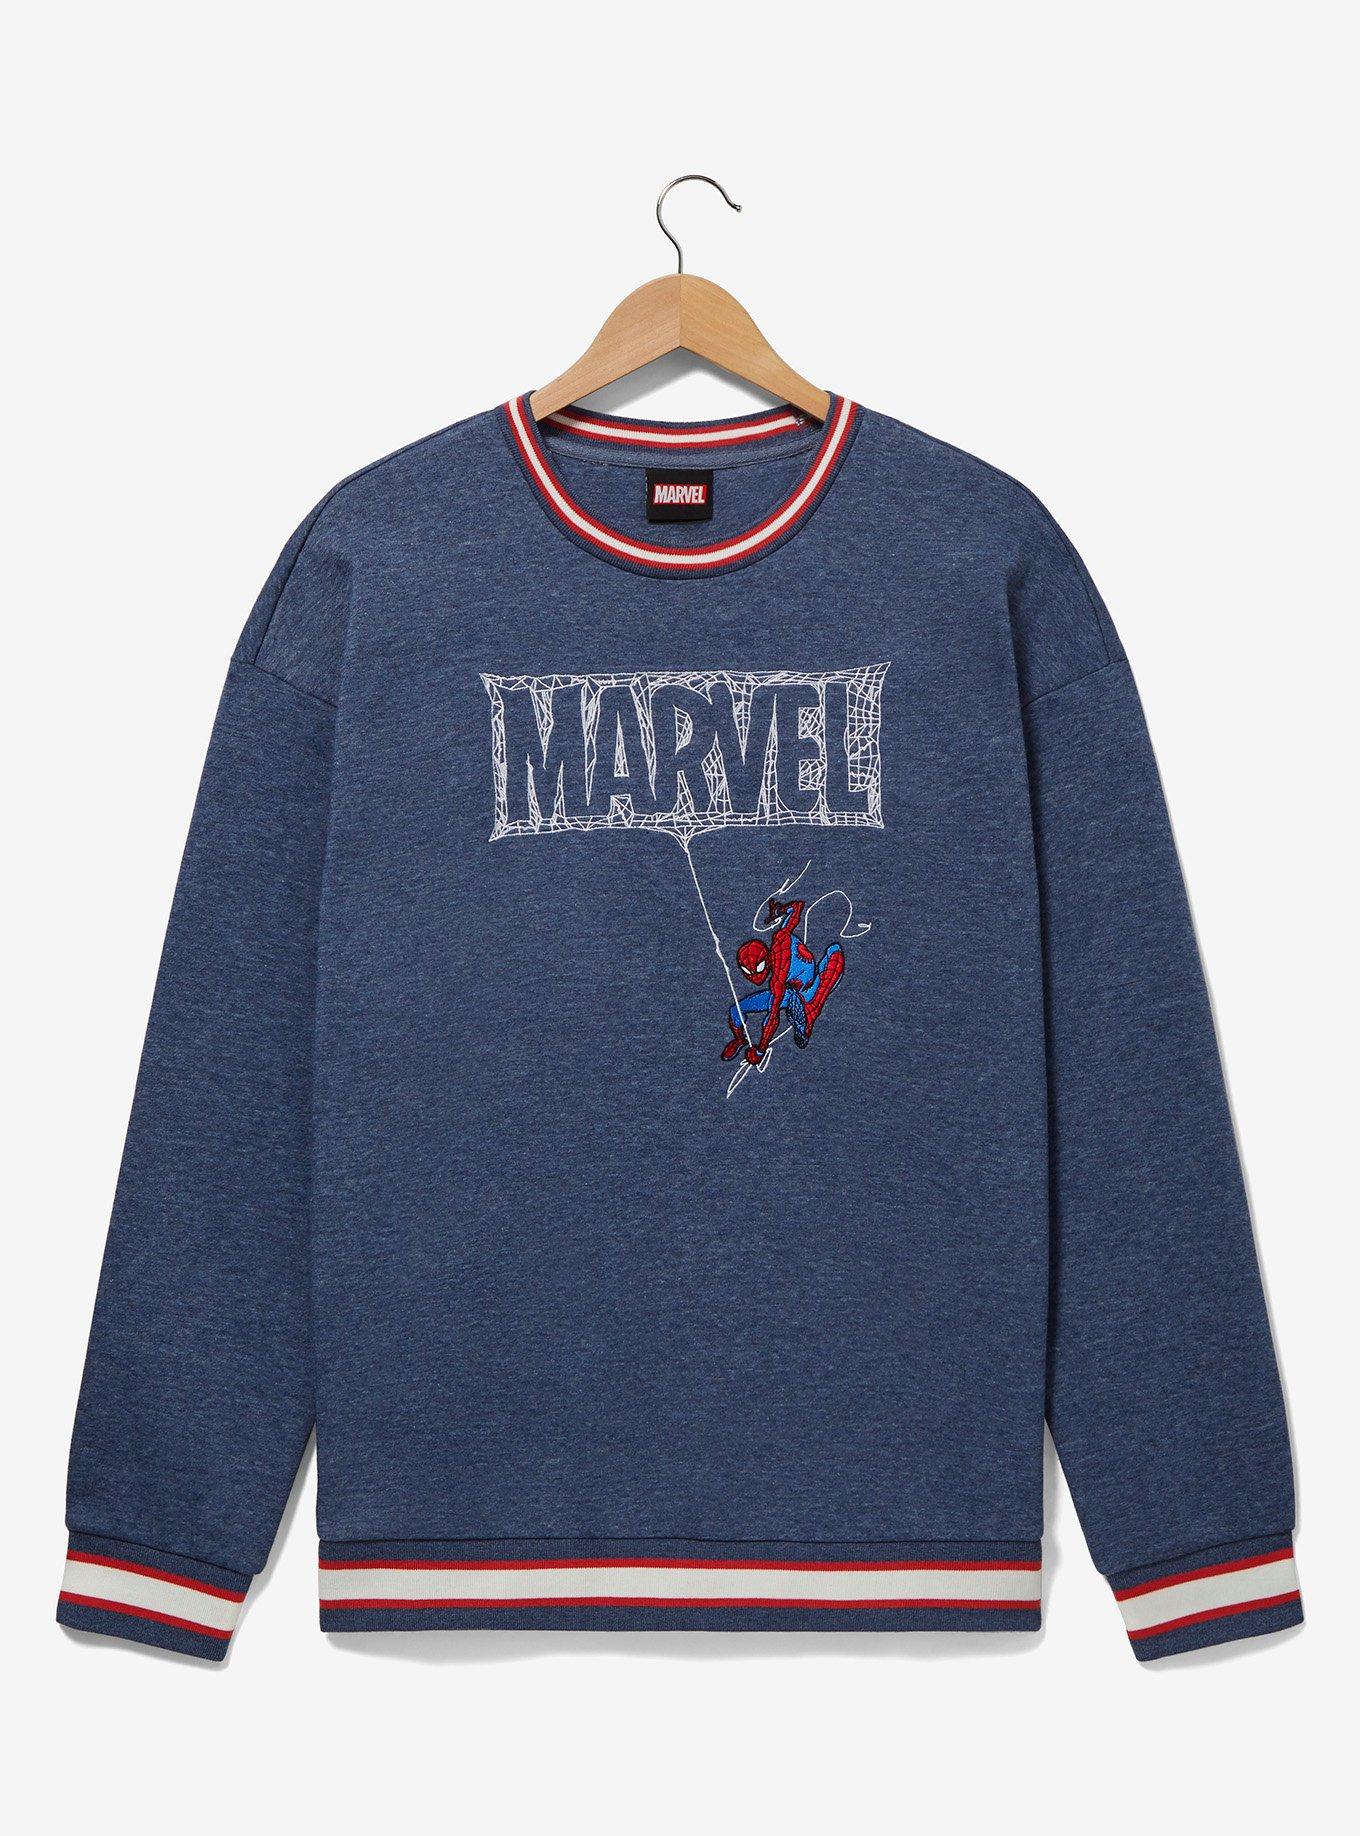  Marvel Men's Amazing Spider-Man Responsibility Pull Over Hoodie  - Charcoal Heather - Small : Clothing, Shoes & Jewelry